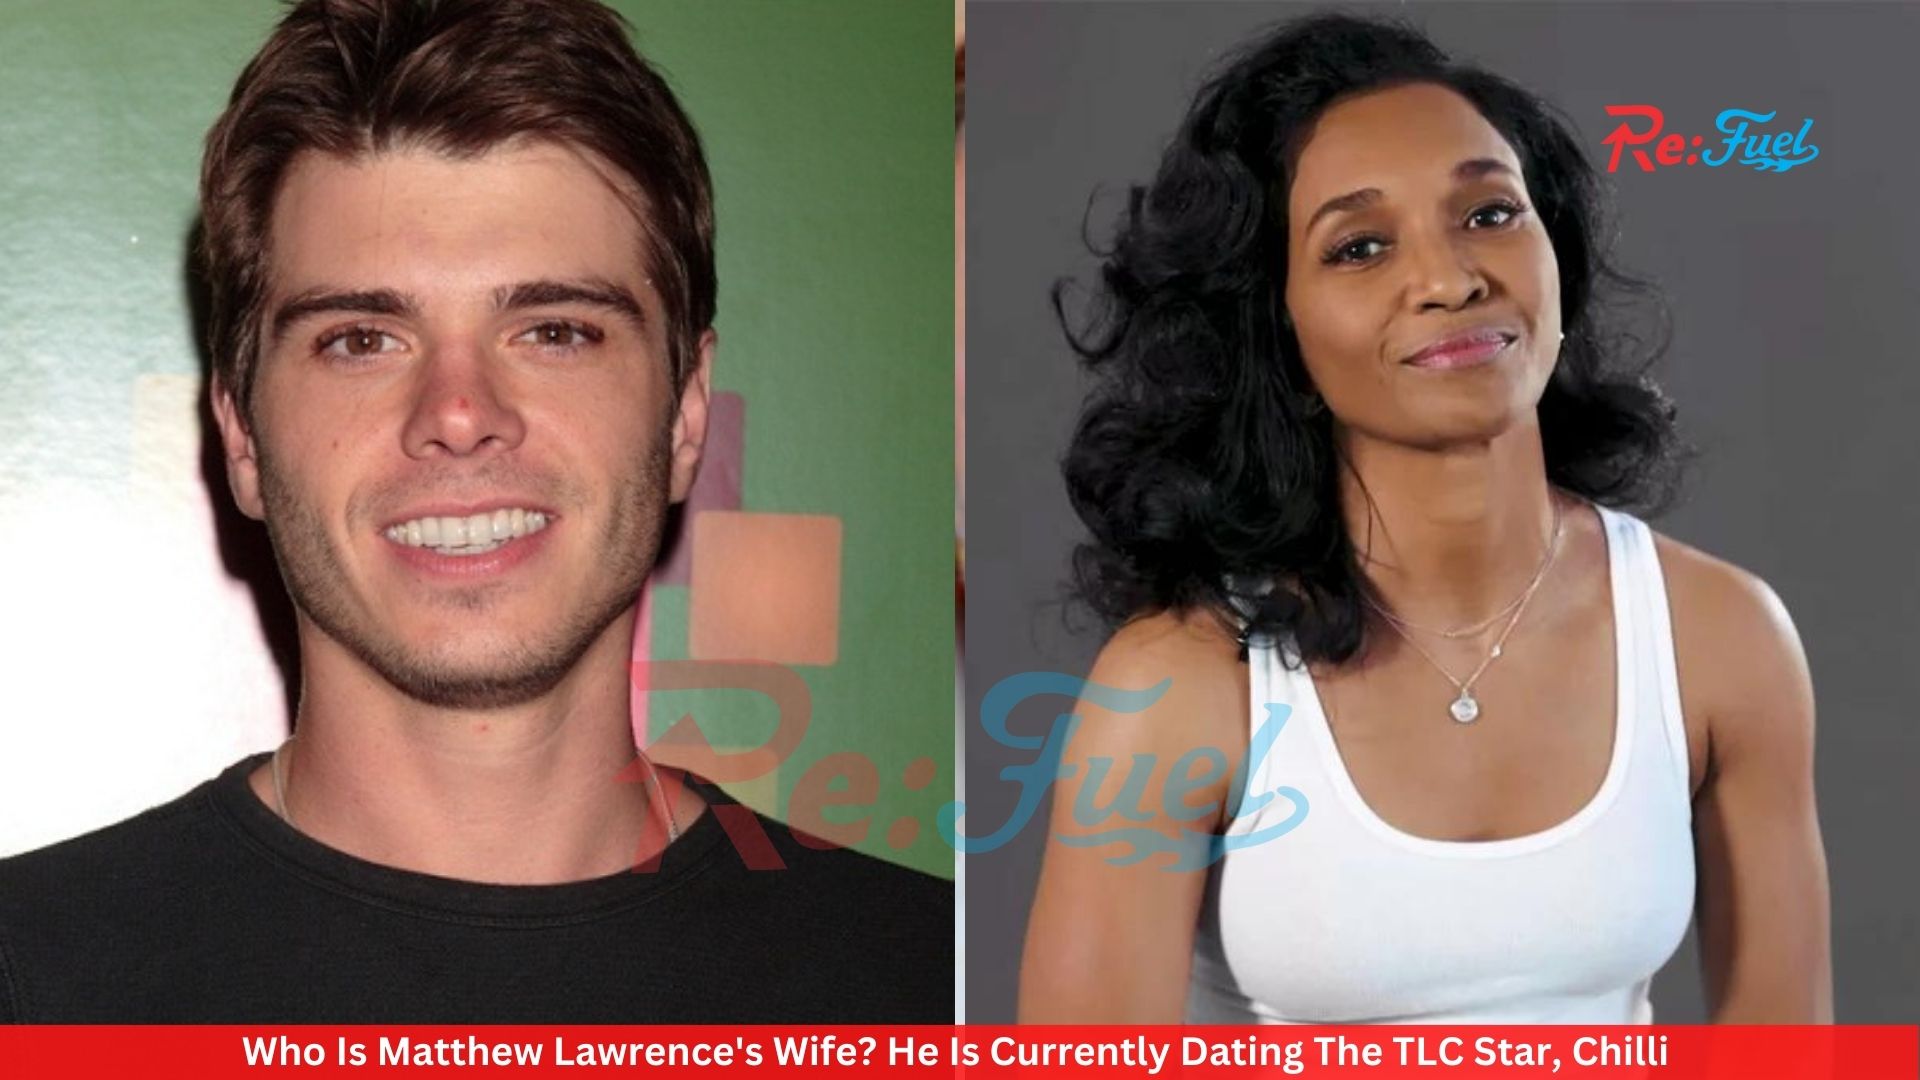 Who Is Matthew Lawrence's Wife? He Is Currently Dating The TLC Star, Chilli